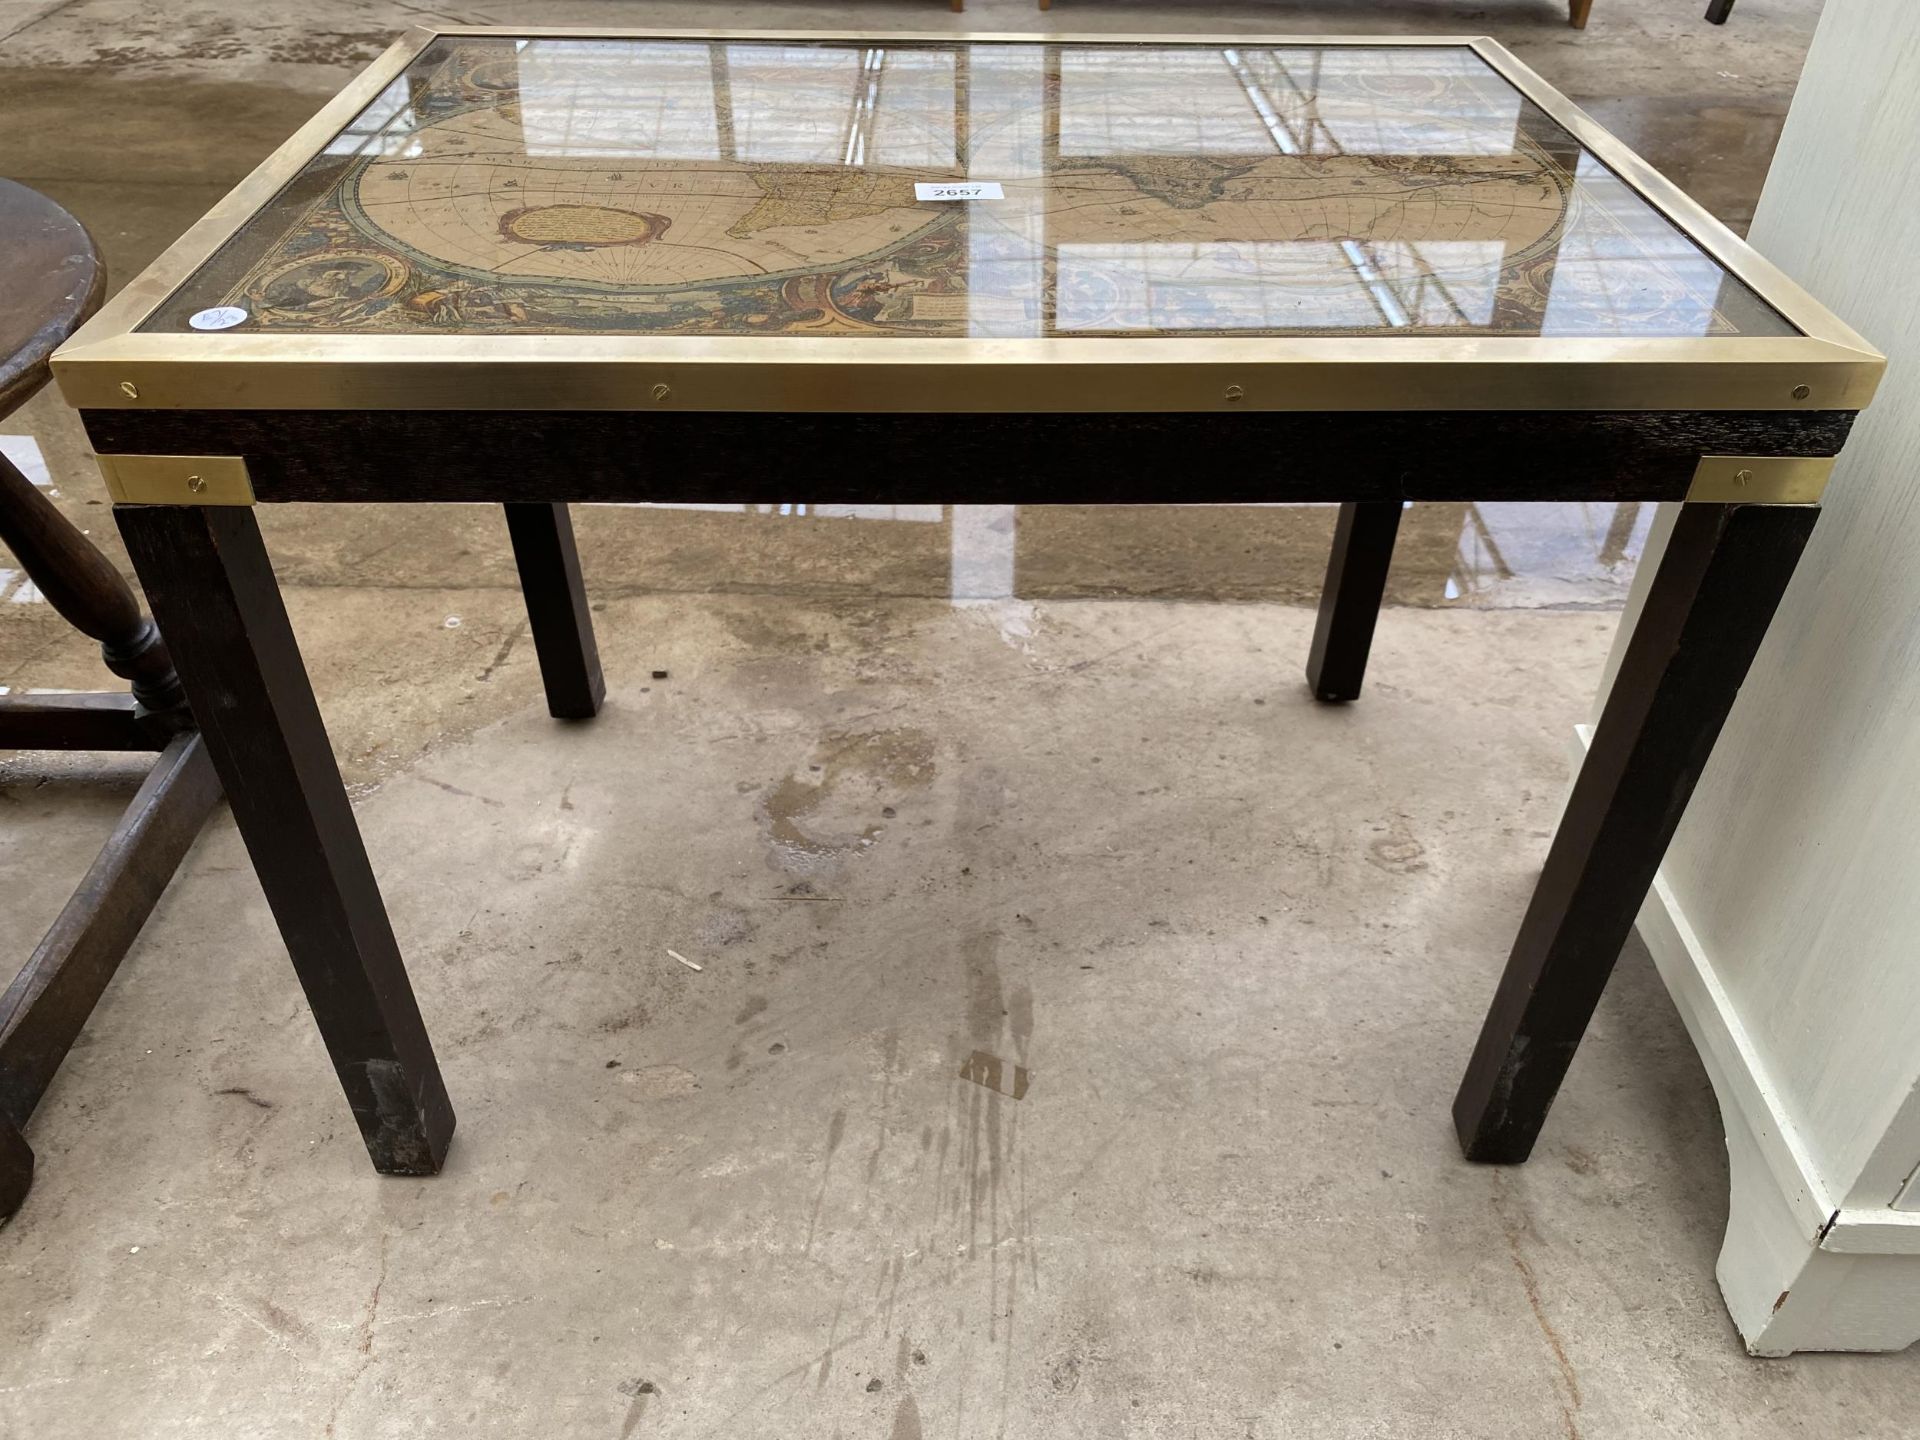 A MODERN COFFEE TABLE, THE TOP INSET WITH VINTAGE STYLE WORLD MAP, 25X18" - Image 3 of 3